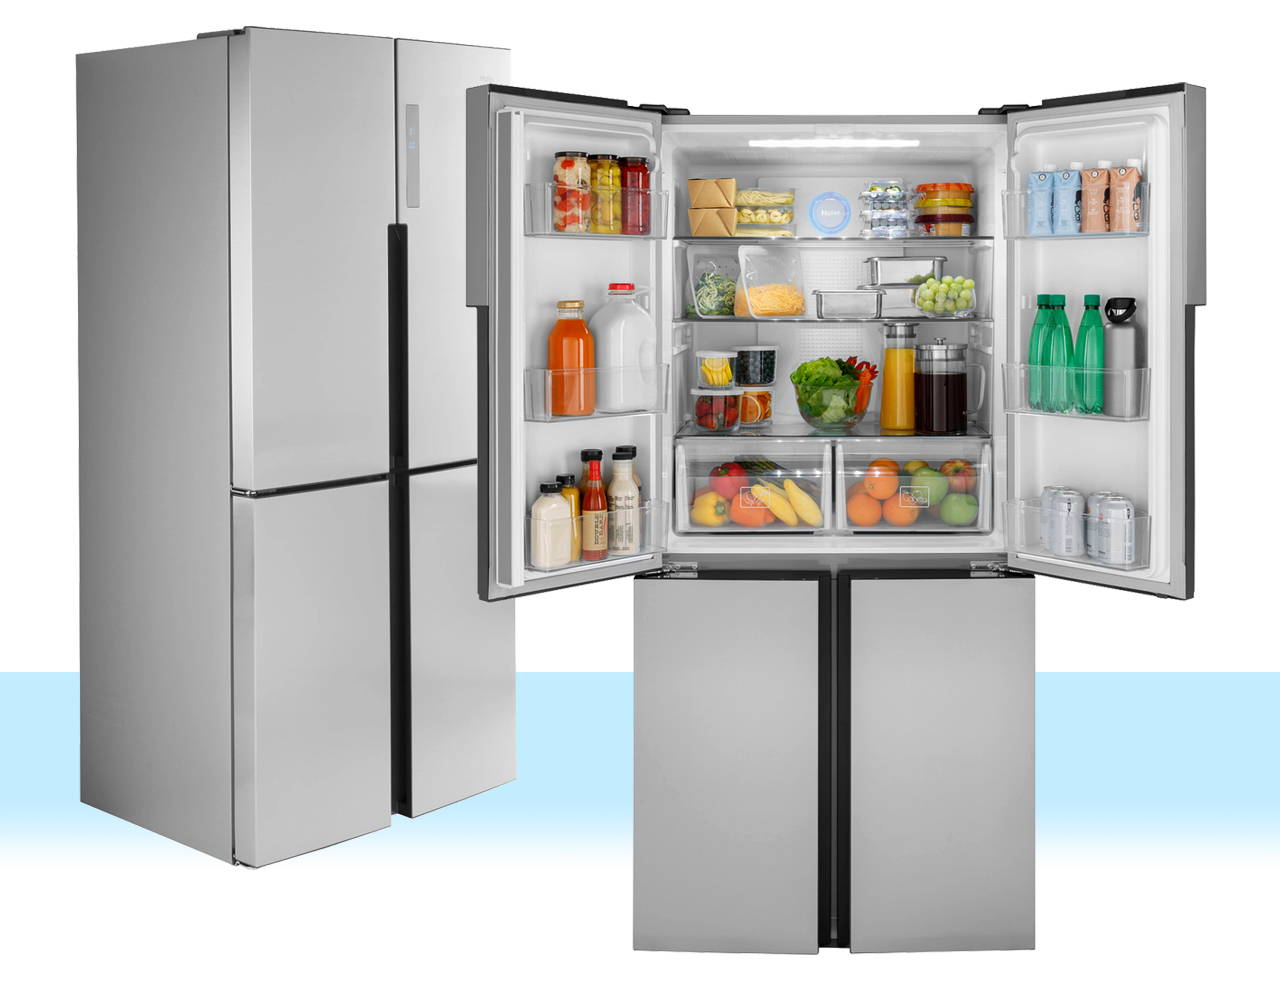 Two Haier refrigerators displayed side by side. One refrigerator's french doors are open to reveal a loaded refrigerator with food and drinks.